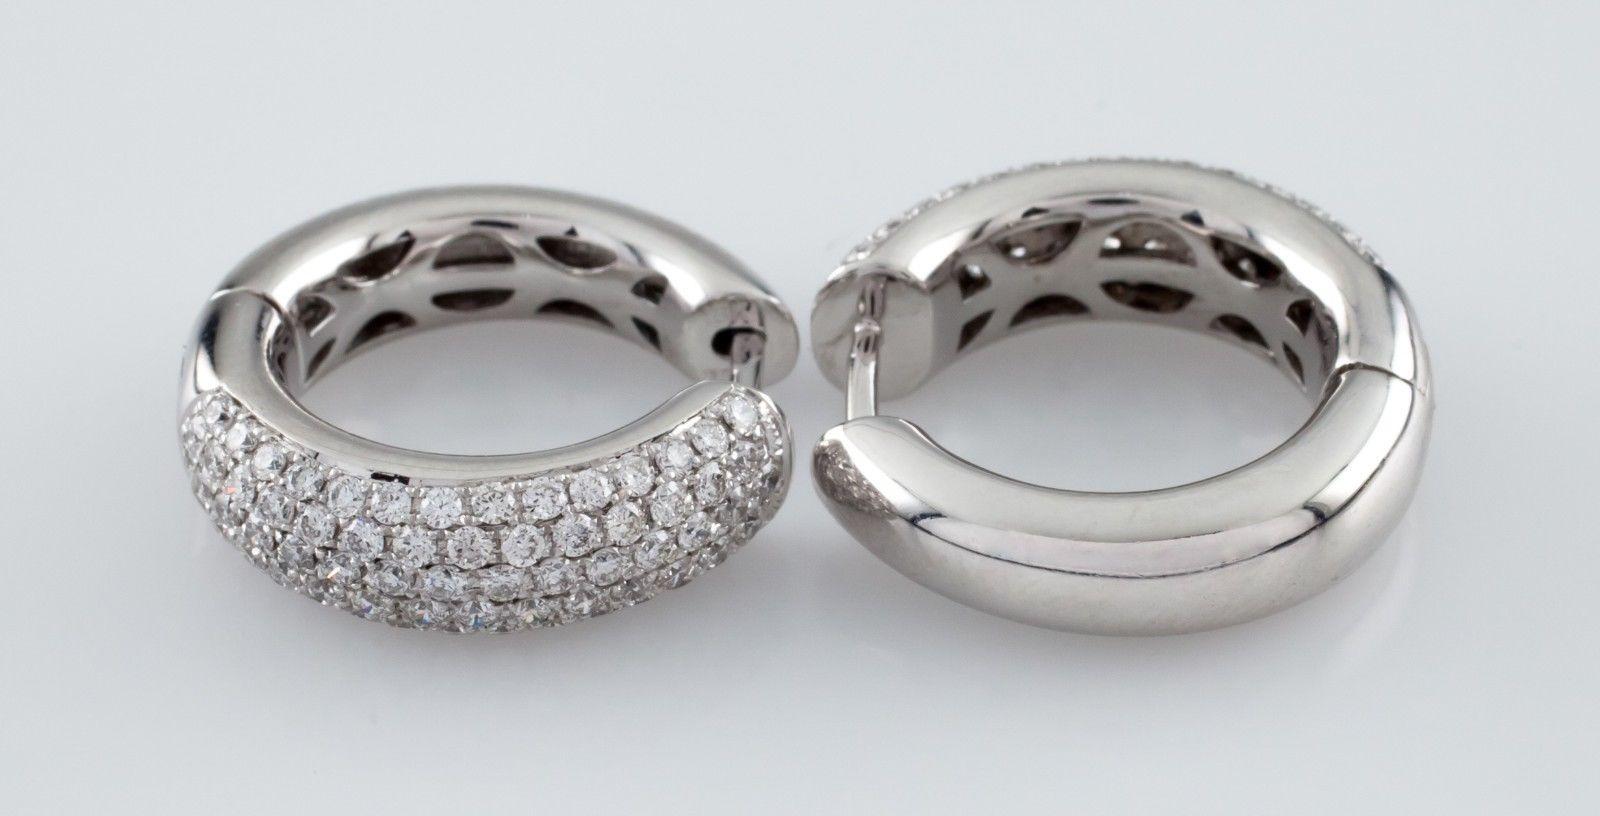 Gorgeous 18k White Gold Hoop Earrings
Feature Round Cut Pave Set Diamonds on Half of Each Domed Hoop
Total Diamond Weight = Approximately 3 carats
Average Color: G
Average Clarity: VS
Diameter of Hoop = 19 mm
Width of Hoop = 6 mm
Total Mass = 10.2